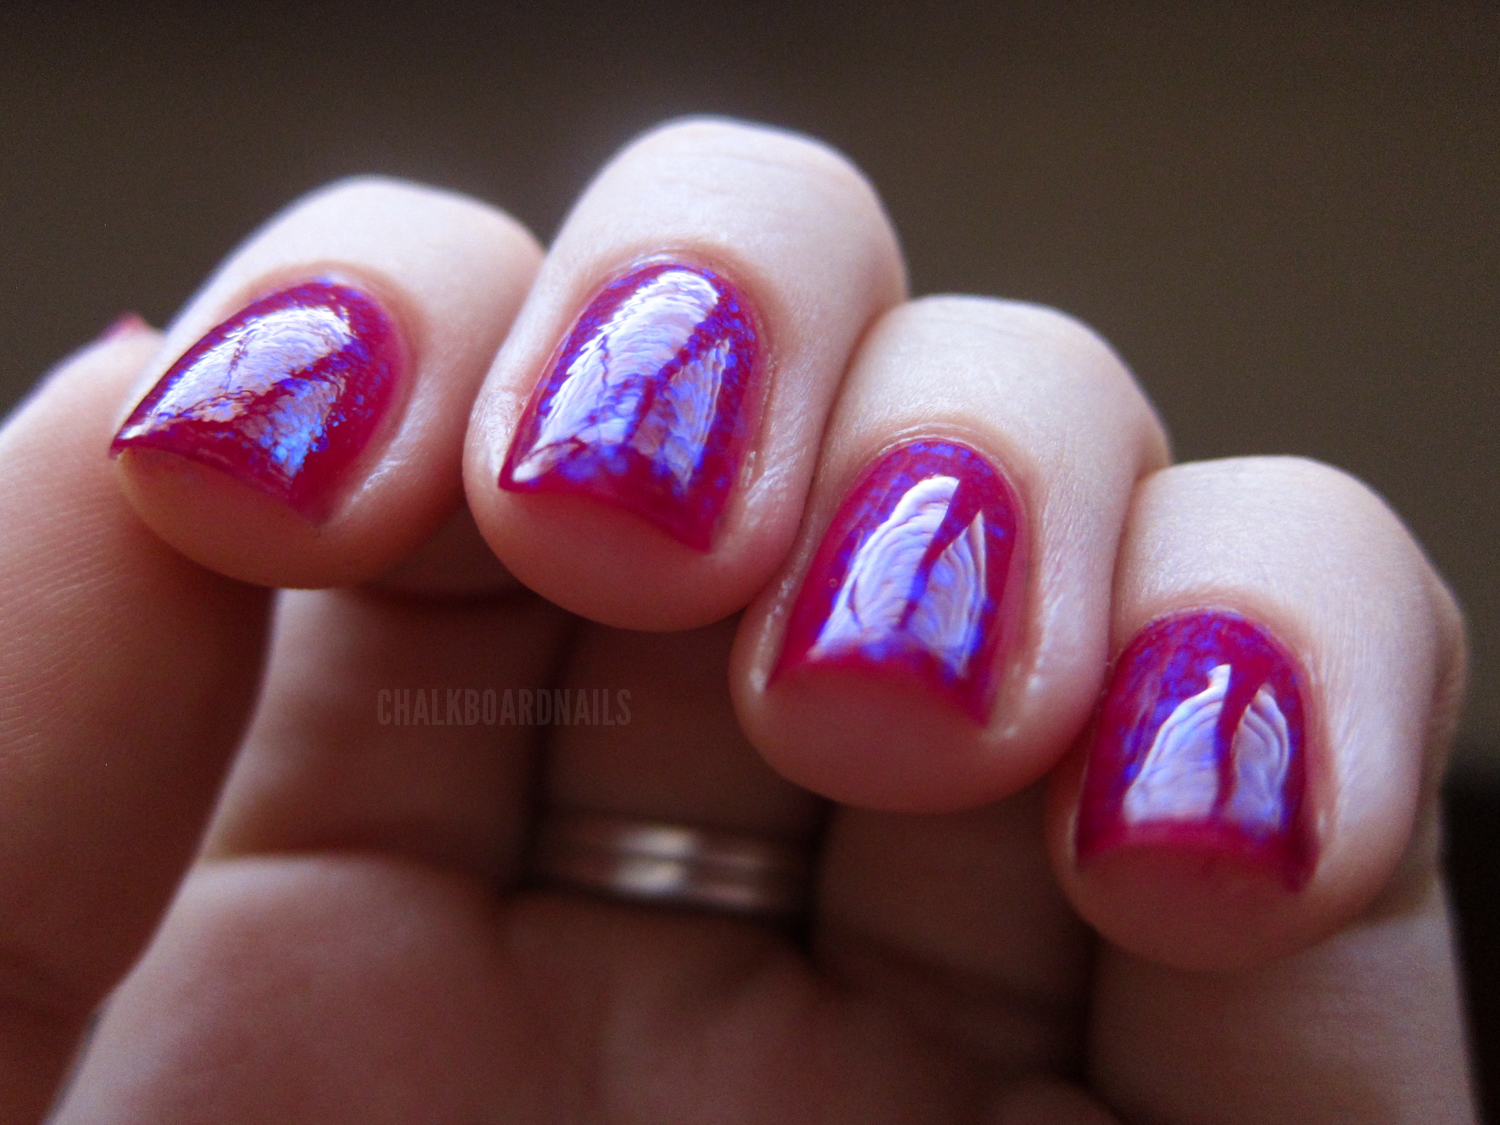 Who's hungry for a jelly sandwich? | Chalkboard Nails | Nail Art Blog